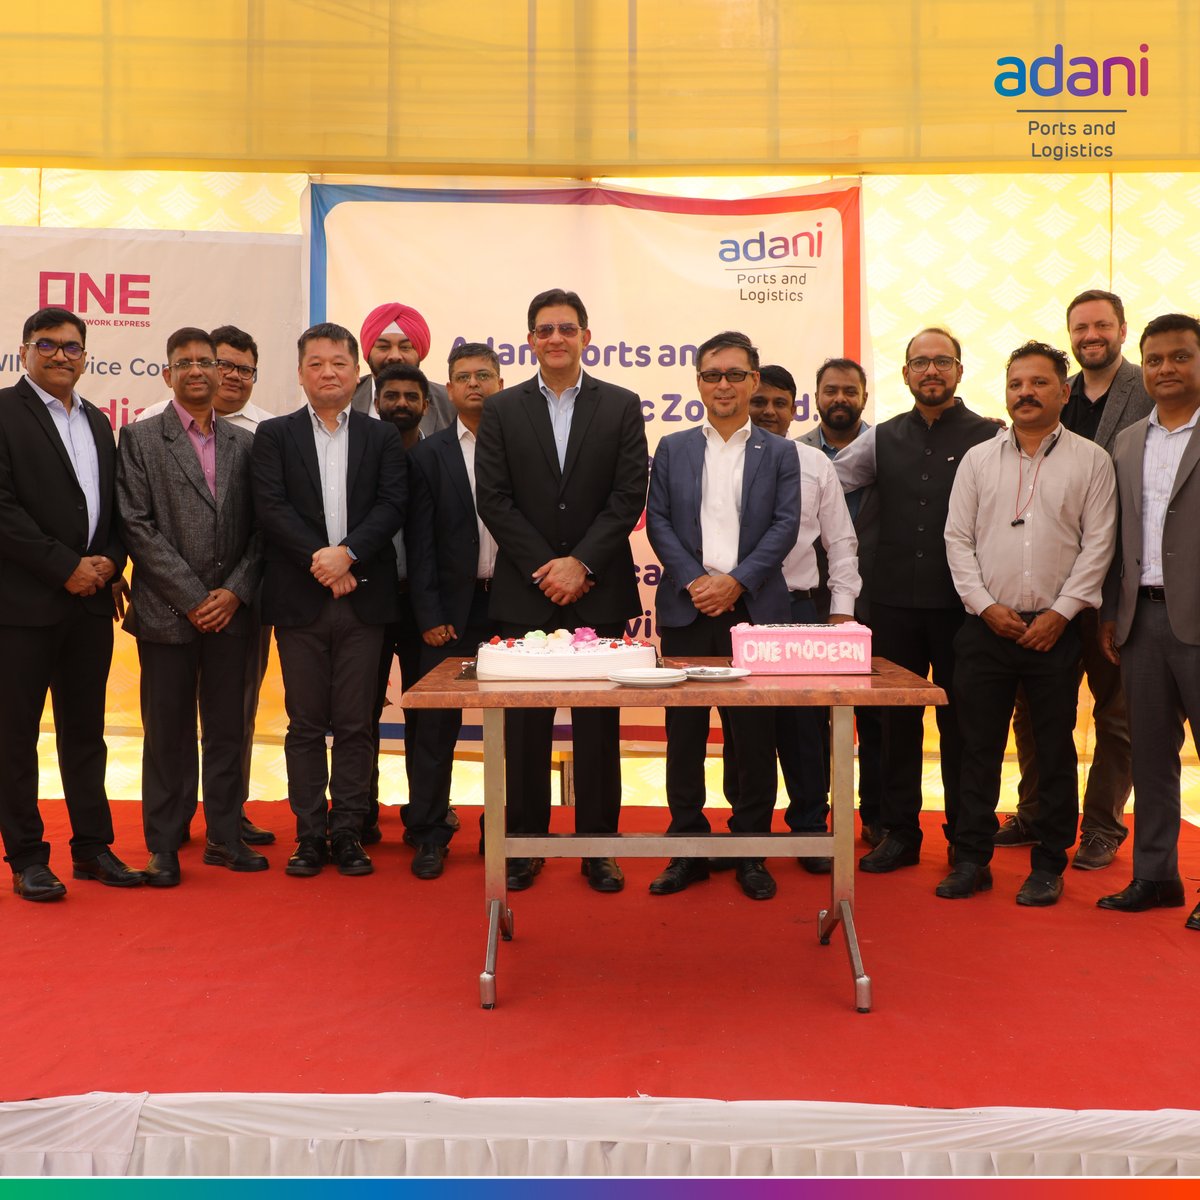 'Delighted to announce that on 15th May, #MundraPort received maiden vessel call of @OceanNetworkExp   WIN service which provides customers in northwest India with a fast and direct service to meet their needs for on-time delivery to and from North America.
This service connects